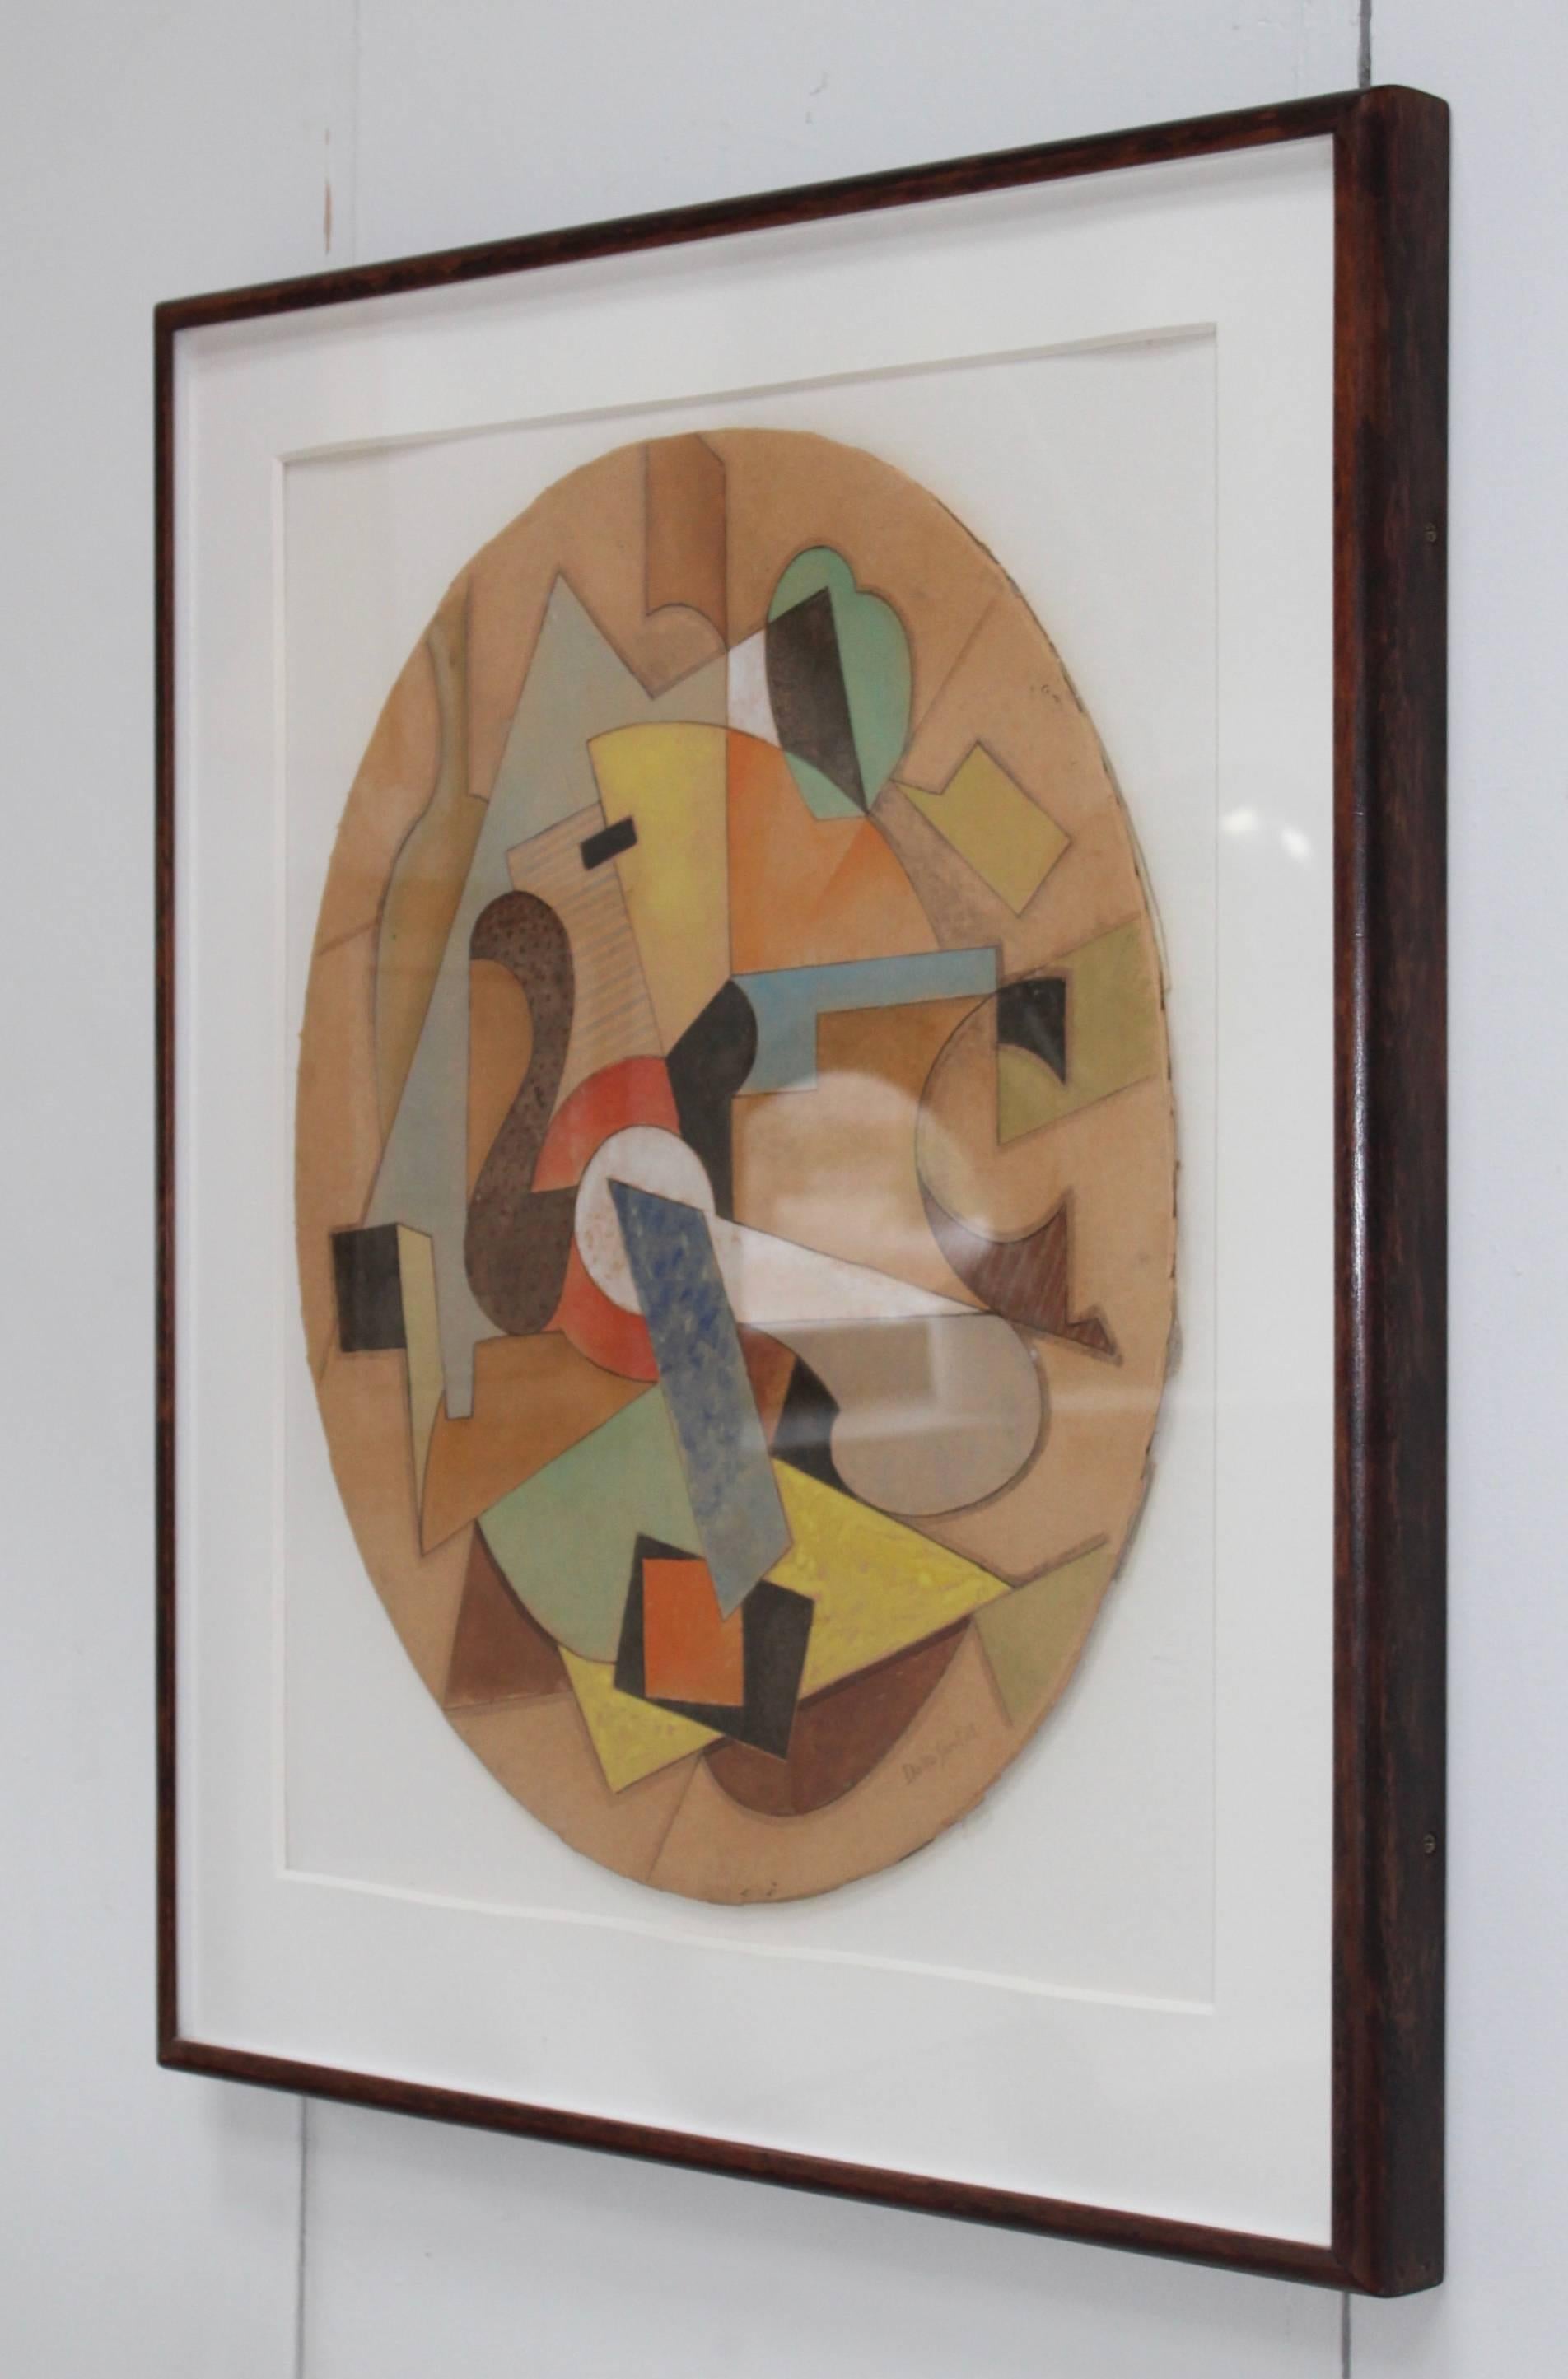 1960s modern abstract artwork. This piece was purchased in a gallery in Paris in 1981.